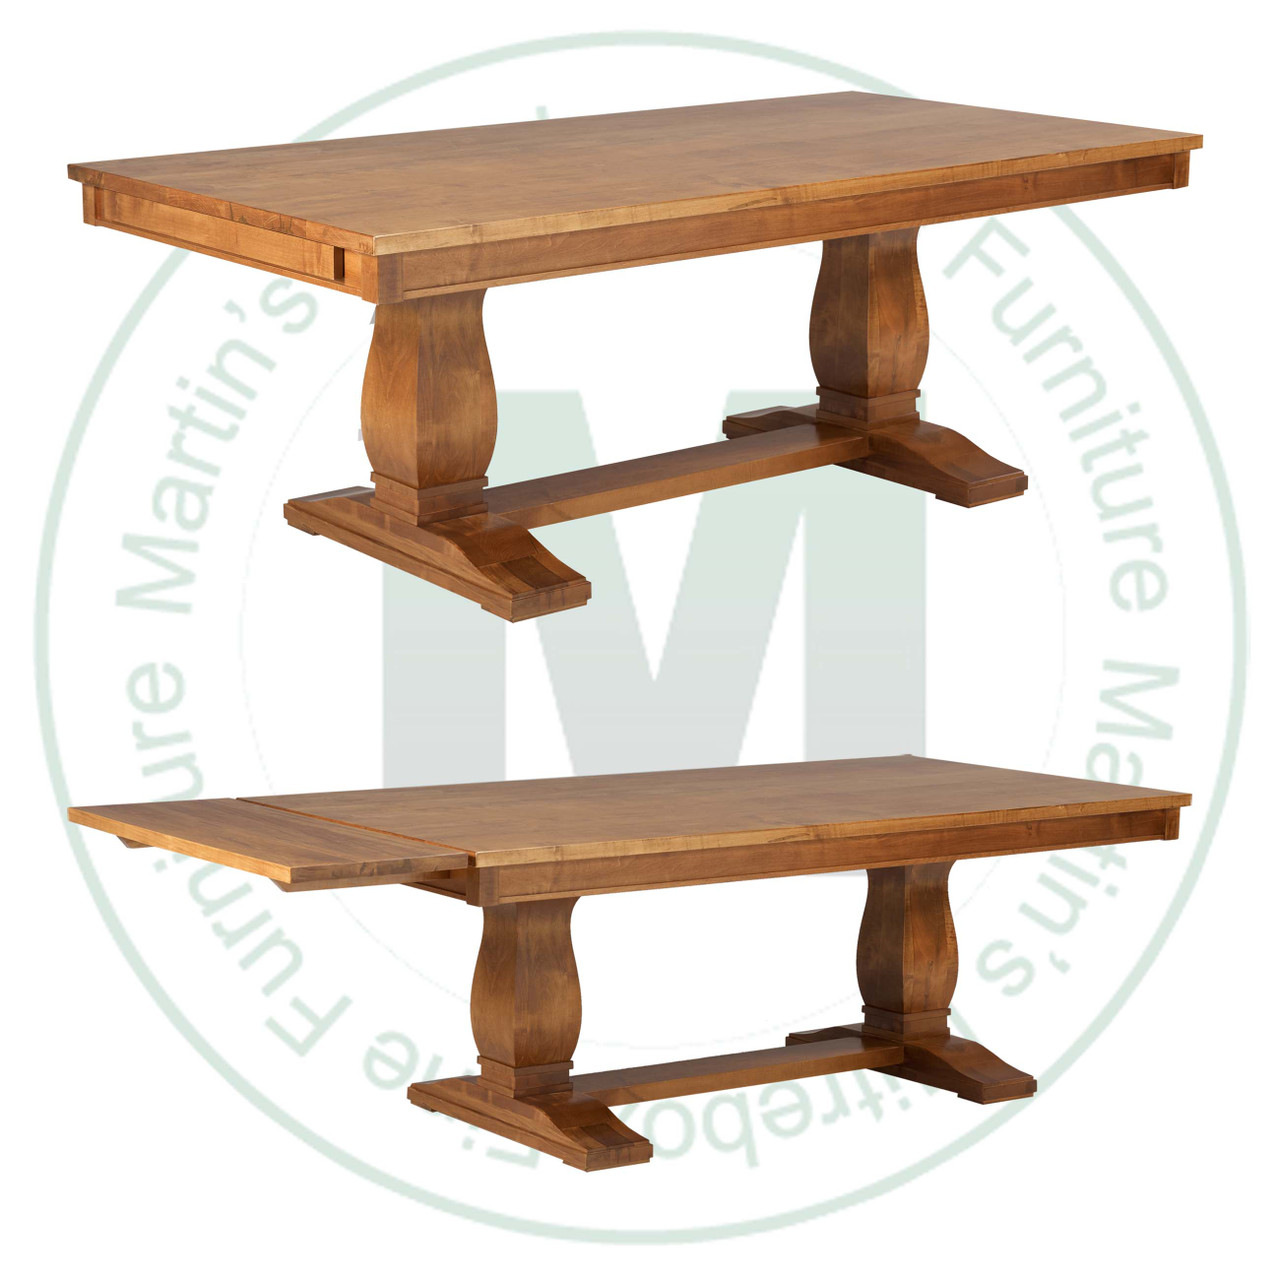 Oak Madrid Solid Top Double Pedestal Table 54''D x 108''W x 30''H With 2 - 16'' Leaves On End Table Has 1.25'' Thick Top